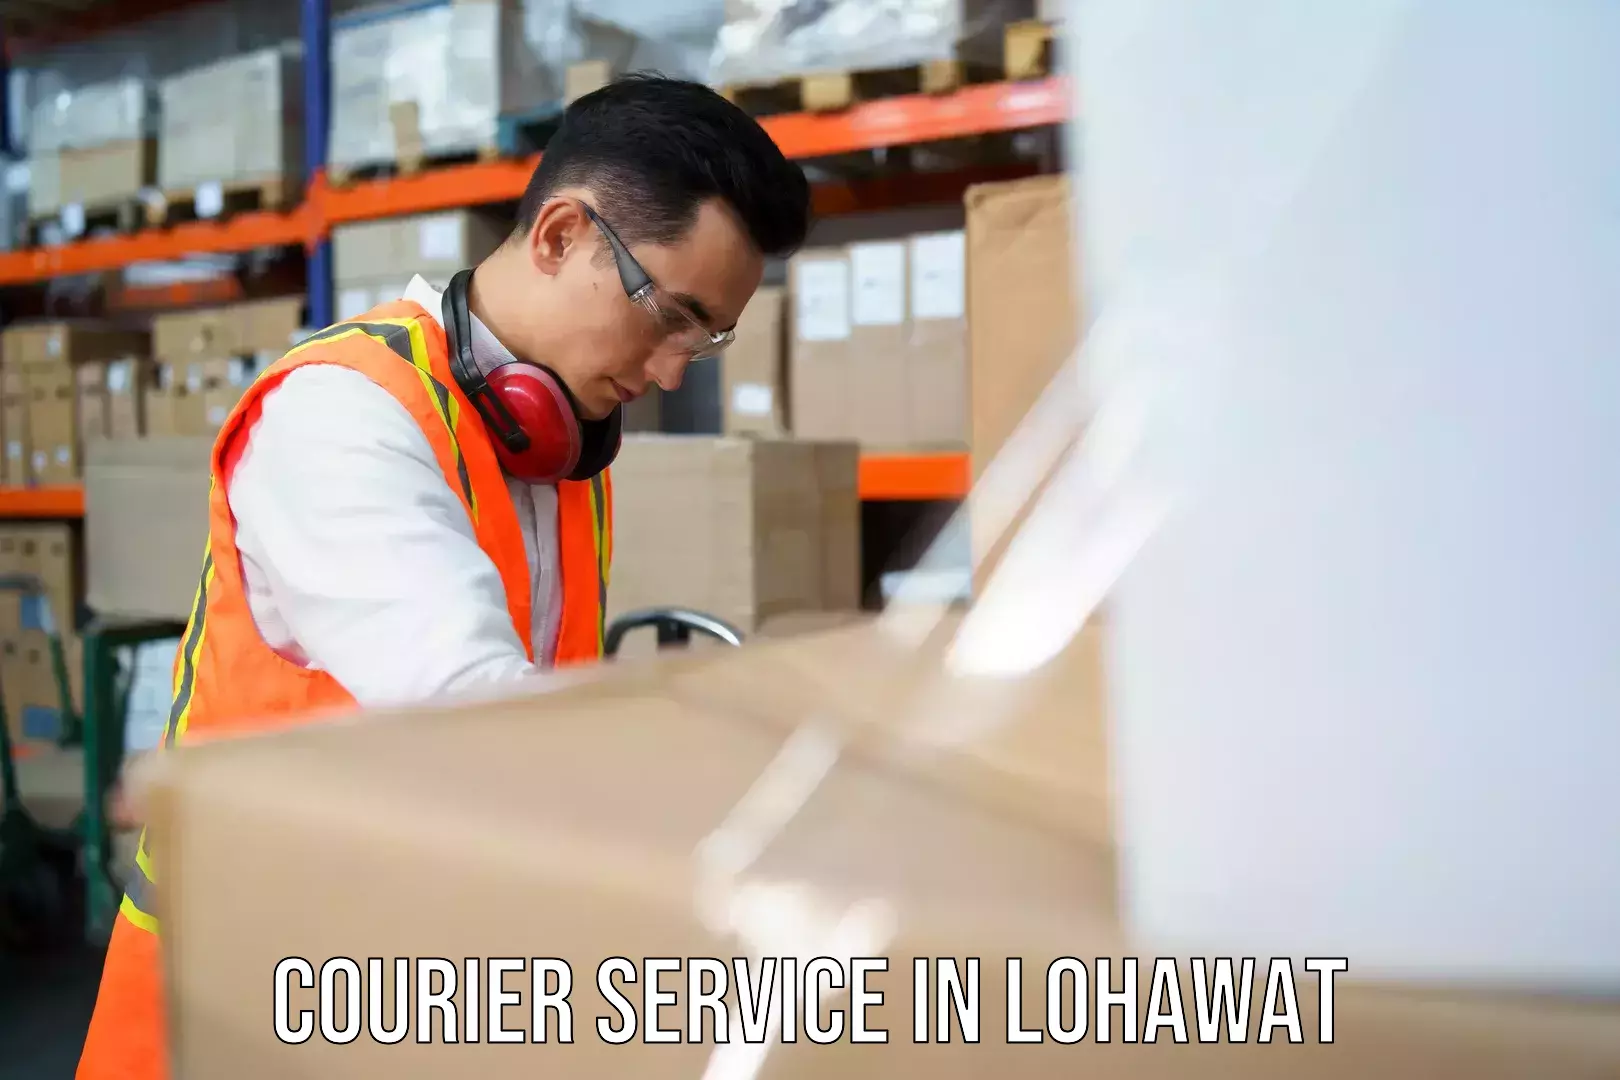 High-capacity parcel service in Lohawat